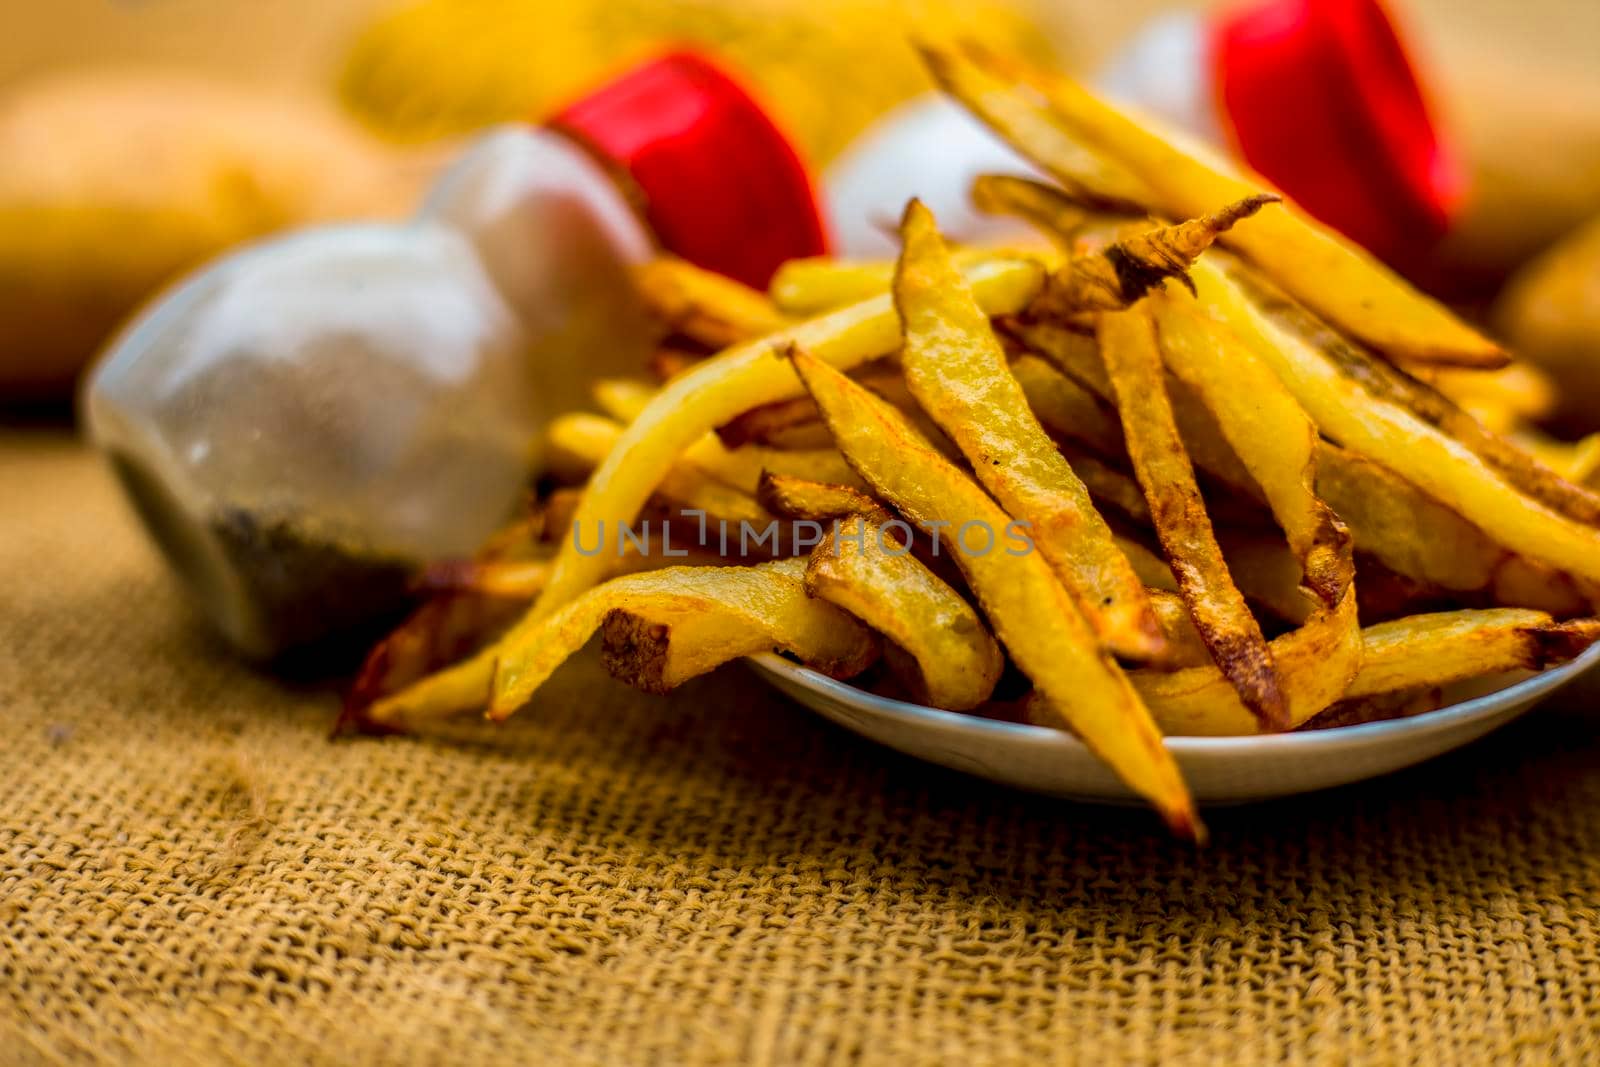 Fresh fired French fries of along with sprinkler of black pepper and salt on jute bag's surface and some raw potato also.